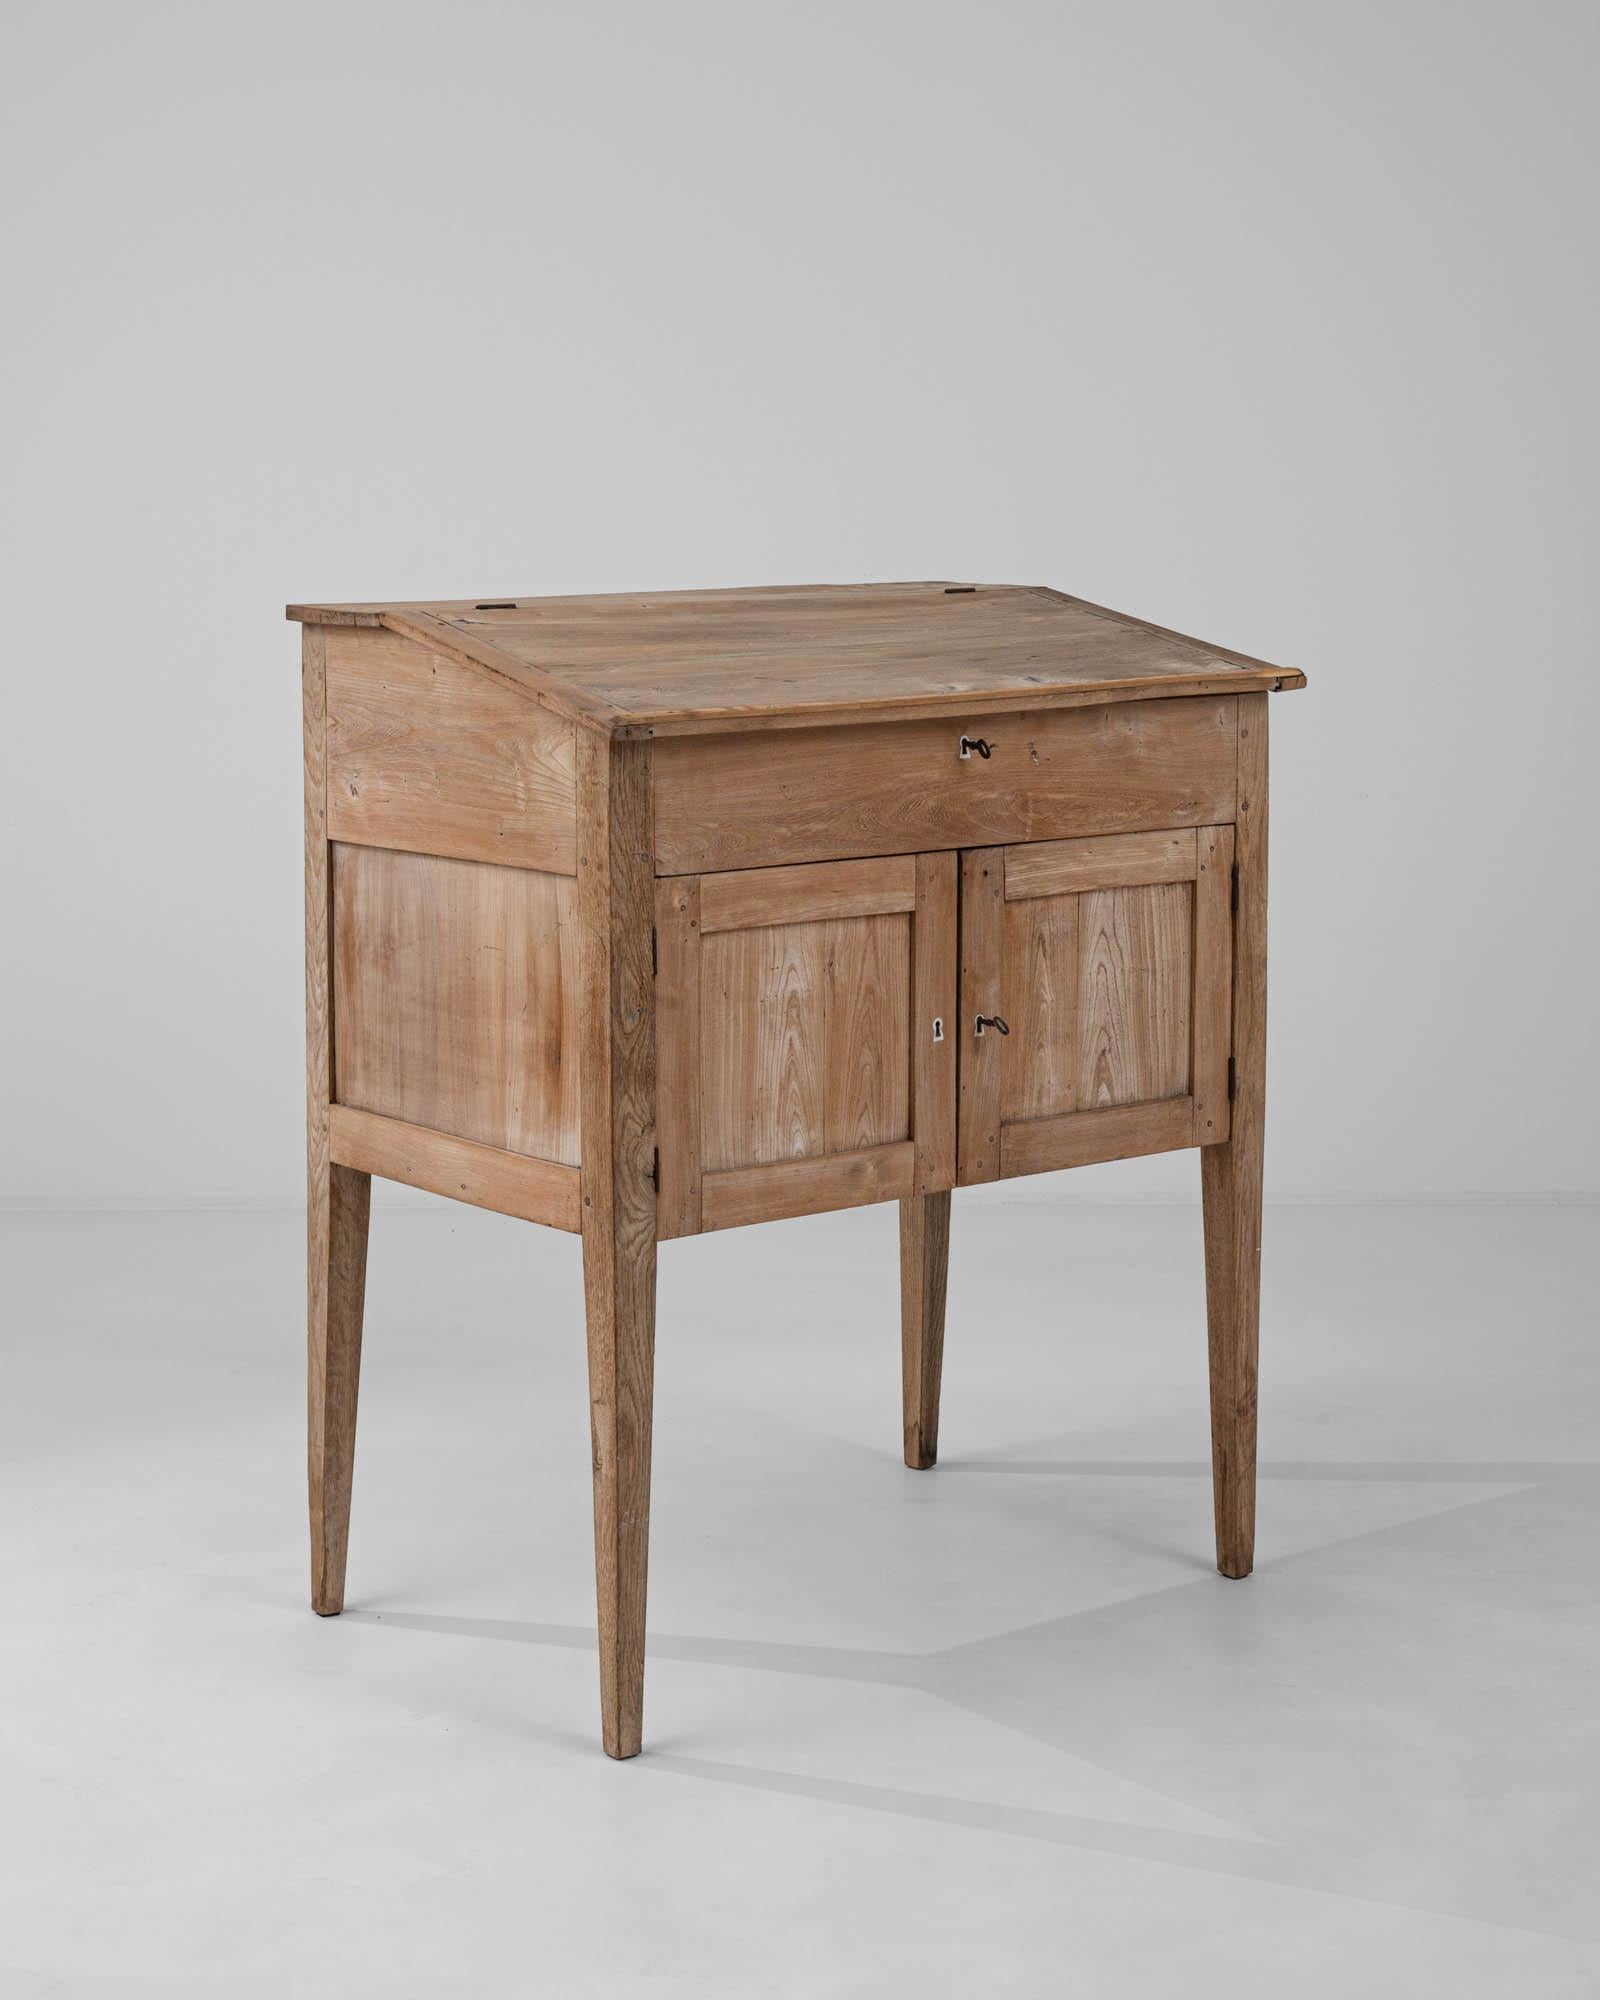 Step back into the quaint charm of the 1900s with this authentic French wooden desk. With its warm, honeyed patina, this piece carries the rich glow of history within its solid, time-honed timber. The desk's design boasts a straightforward,